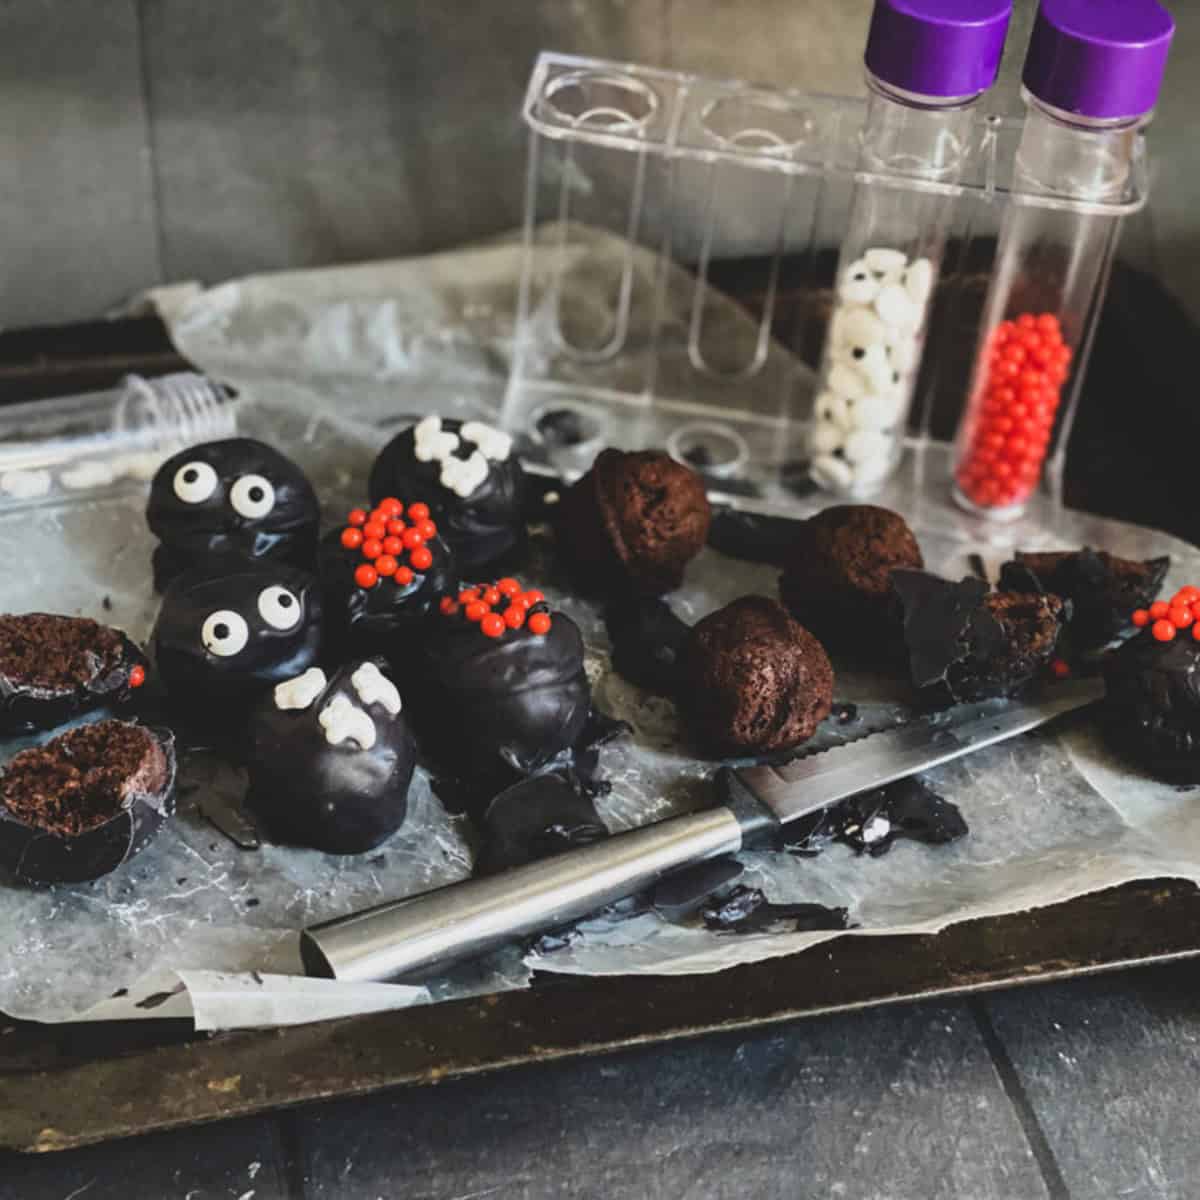 A tray of Halloween- truffles. The truffles are chocolate, round and dusted with colorful sprinkles. Some truffles have googly eyes added for a spooky look. A silver knife sits on the edge of the tray.